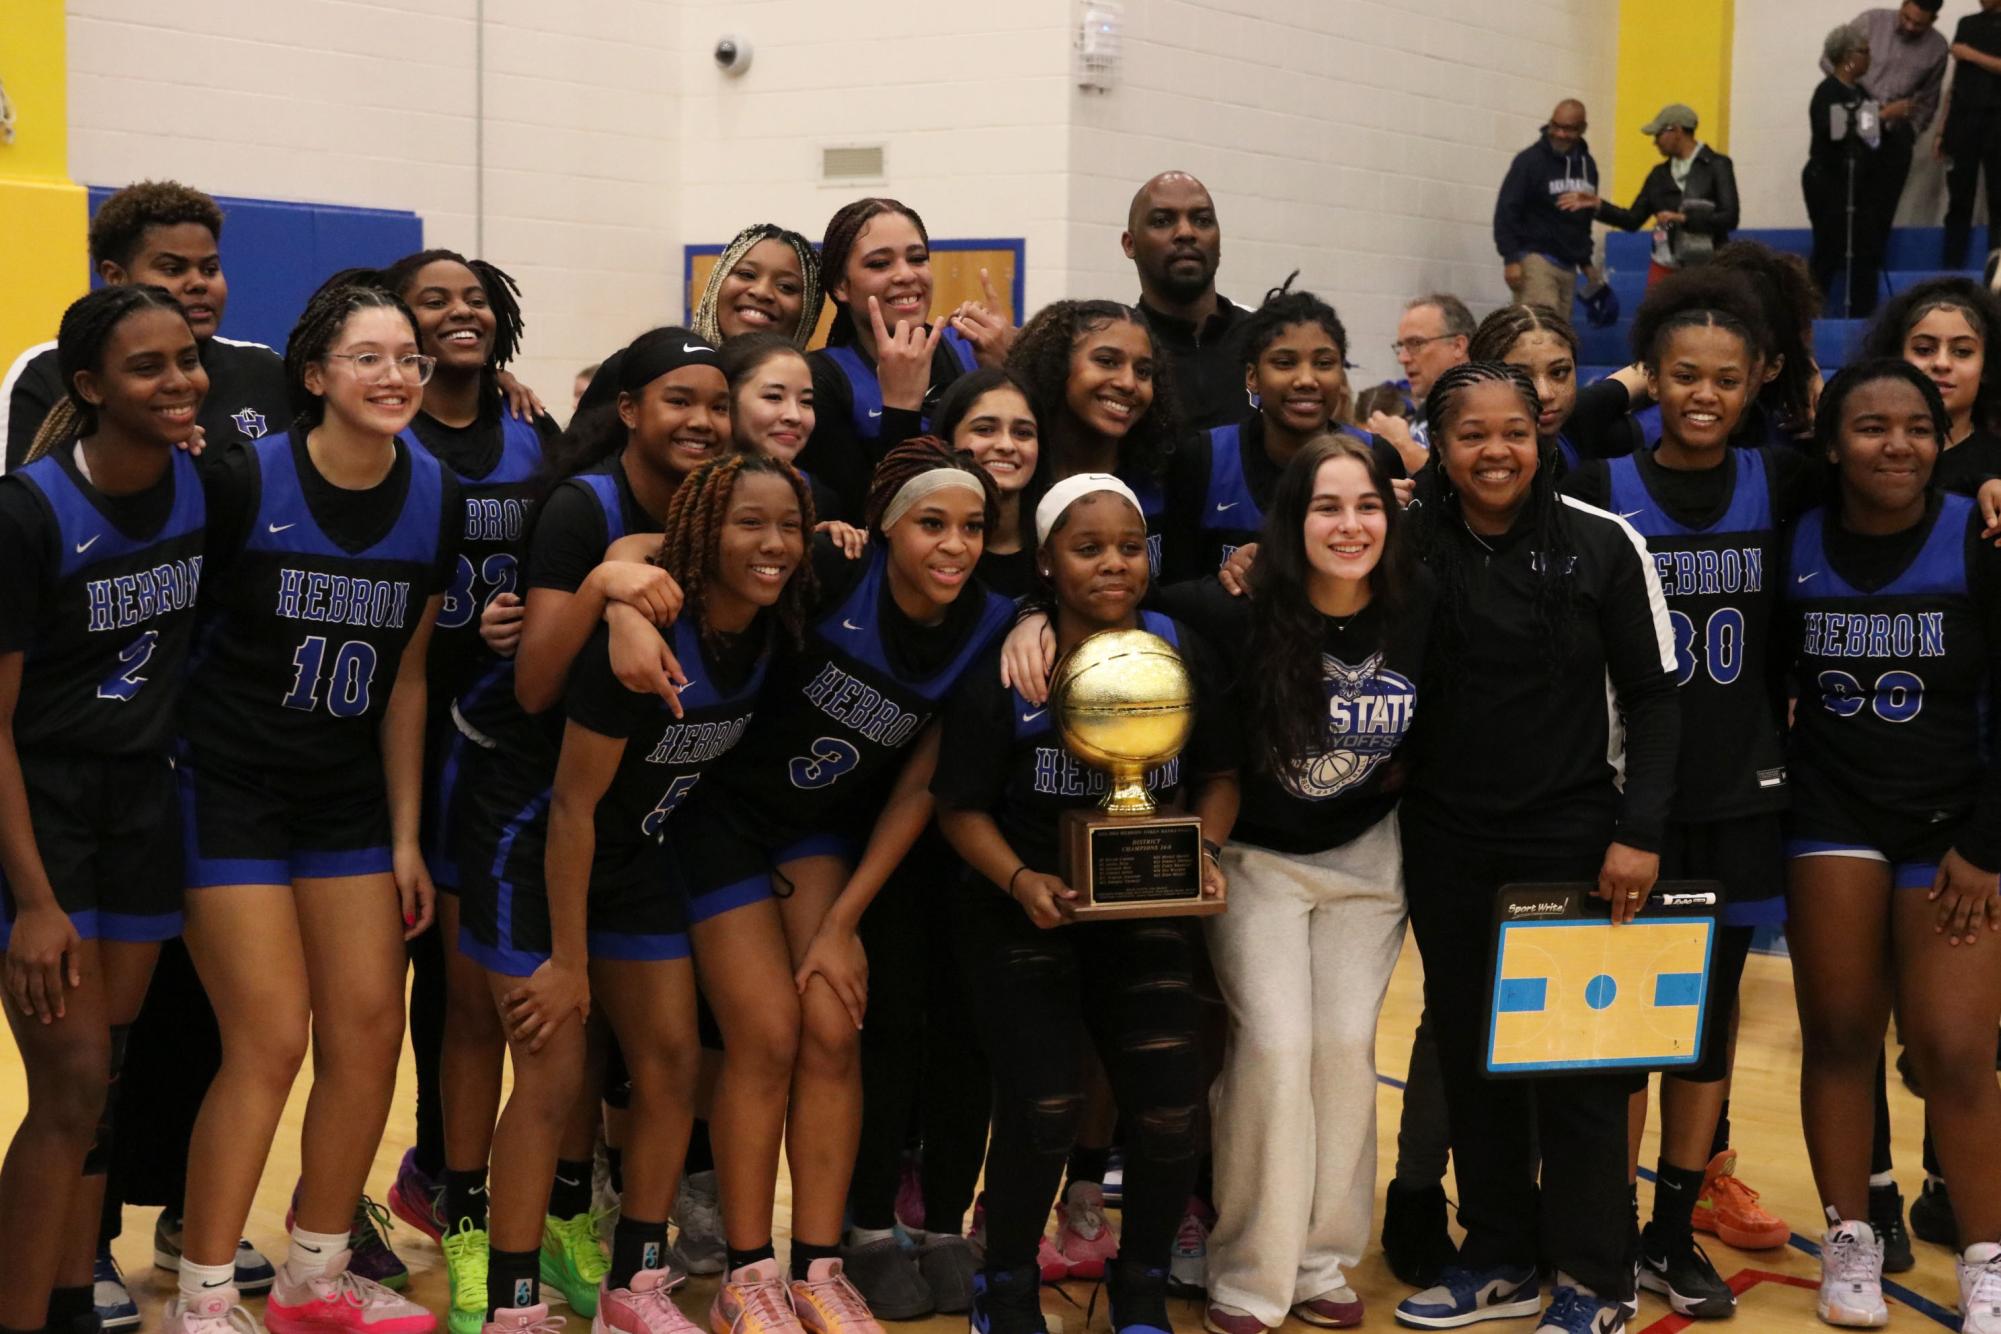 Girls Basketball Team Wins First Playoff Game; Building Momentum for Next Round